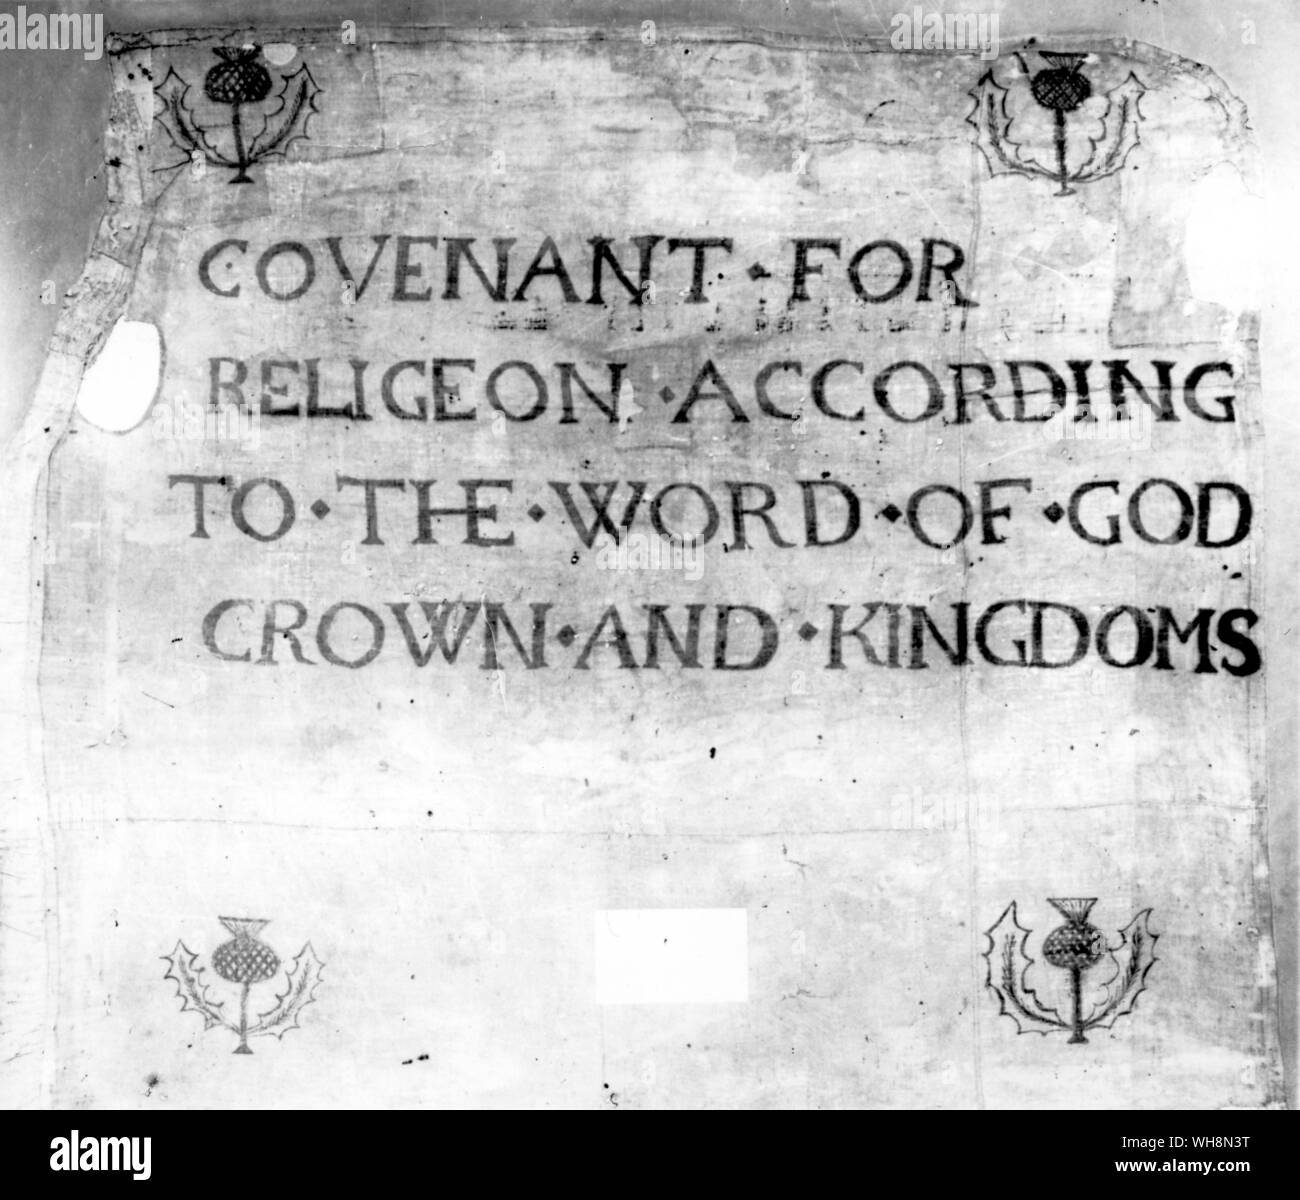 Covenant for Religeon according to the word of God Crown and Kingdoms . A standard carried by the Covenanters 'There was the sound of pipes and fiddles, the singing of psalms, and before the Lord General's tent was a great banner...' Stock Photo